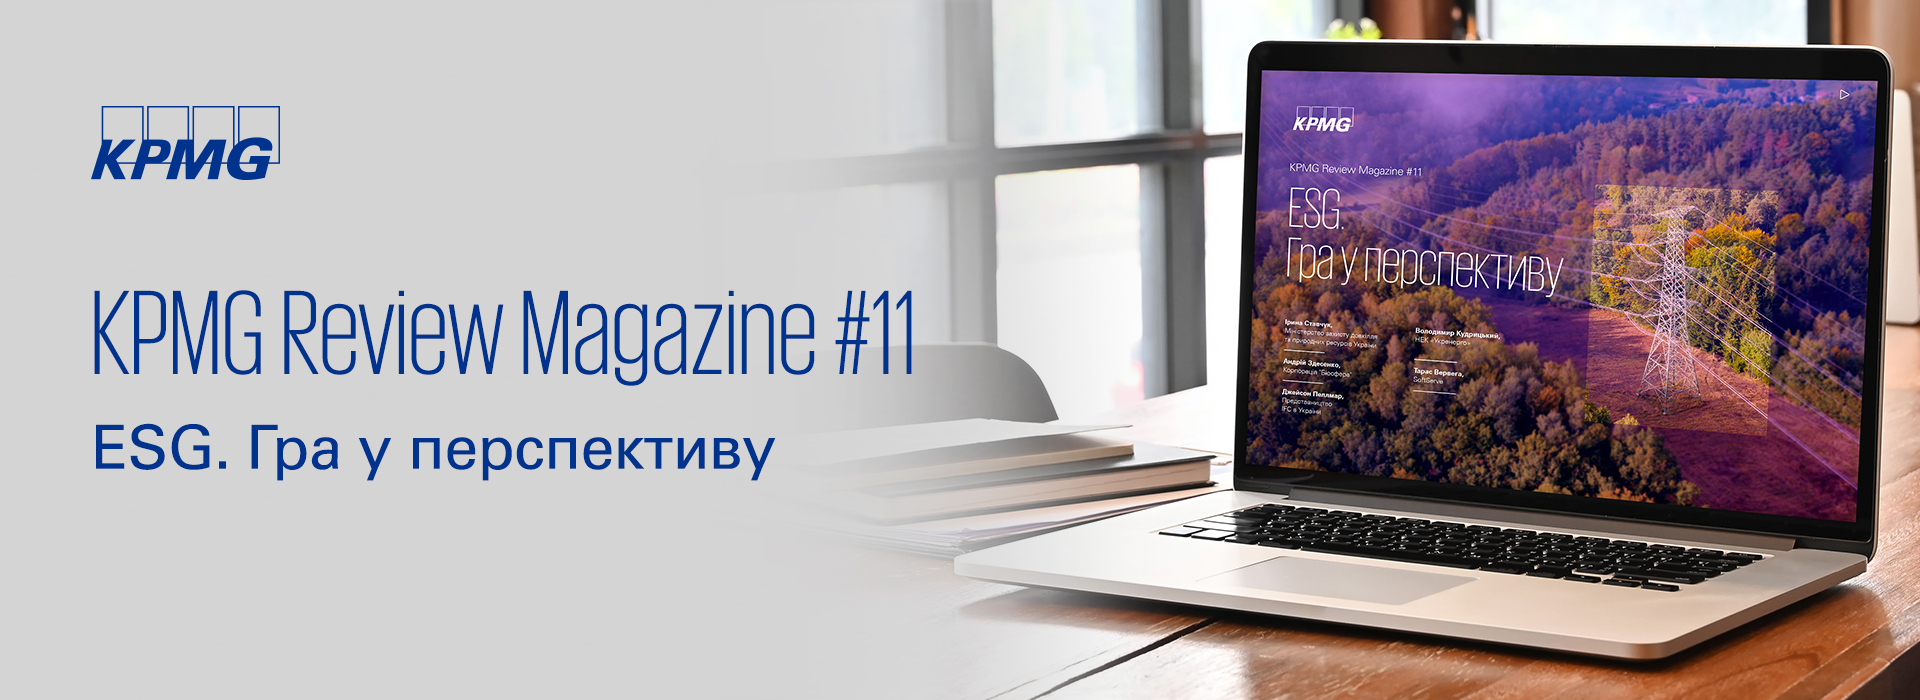 KPMG in Ukraine Launches Its 11th KPMG Review Magazine “ESG. Playing Perspective”